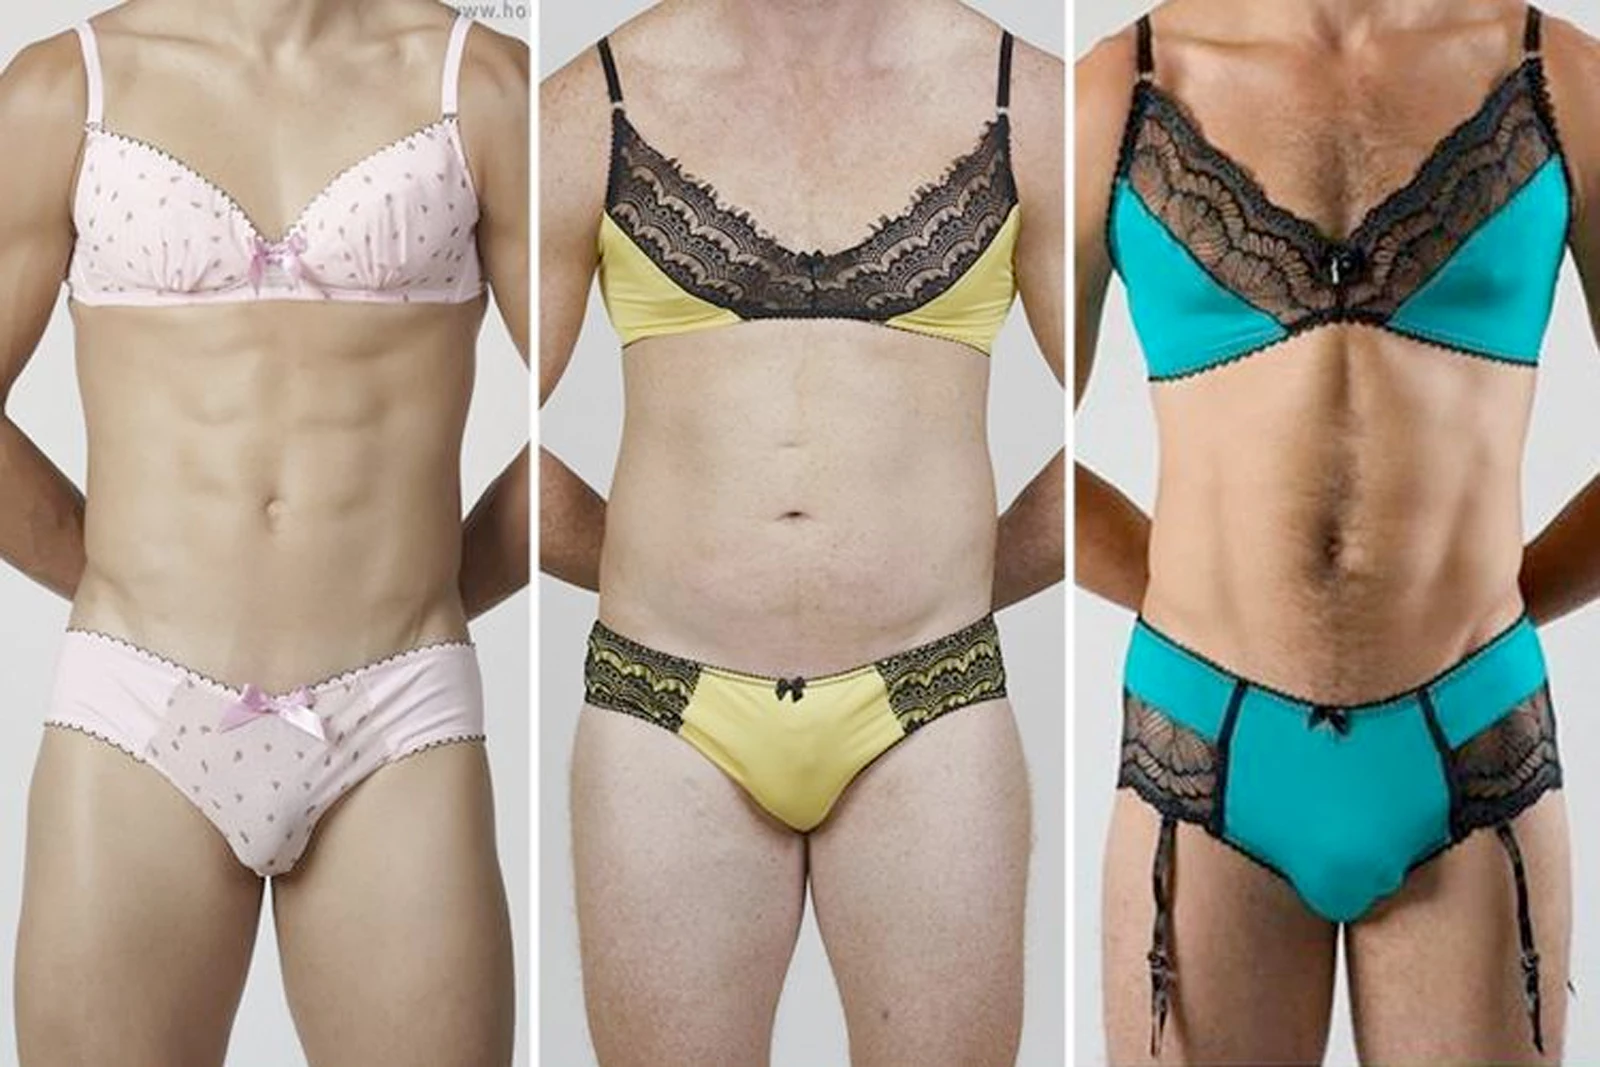 Now For Sale: Men's Lingerie and Bras